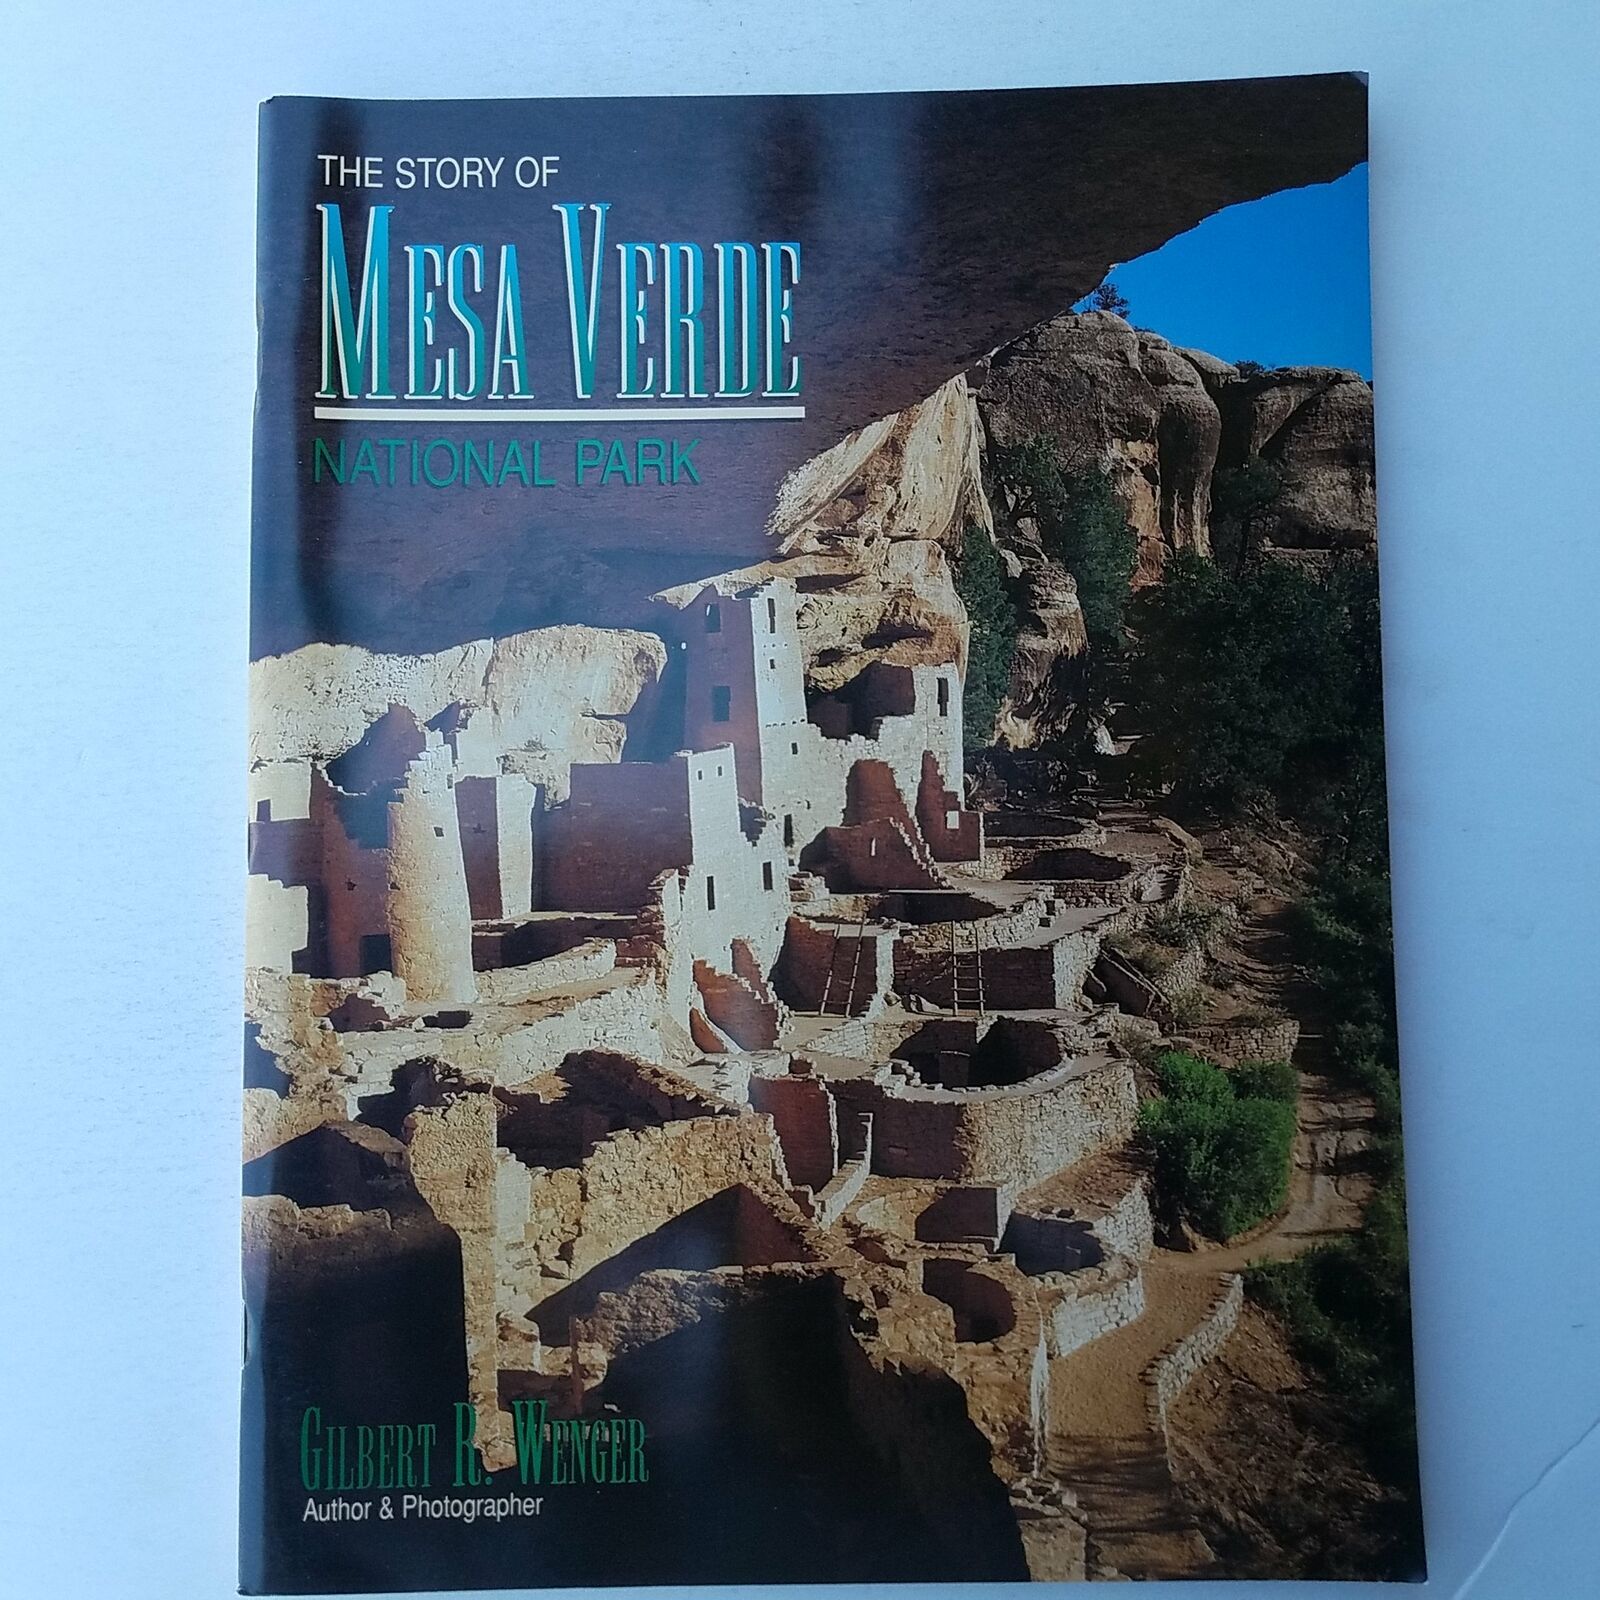 The Story Of Mesa Verde National Park By Gilbert R. Wenger 2000 0937062154